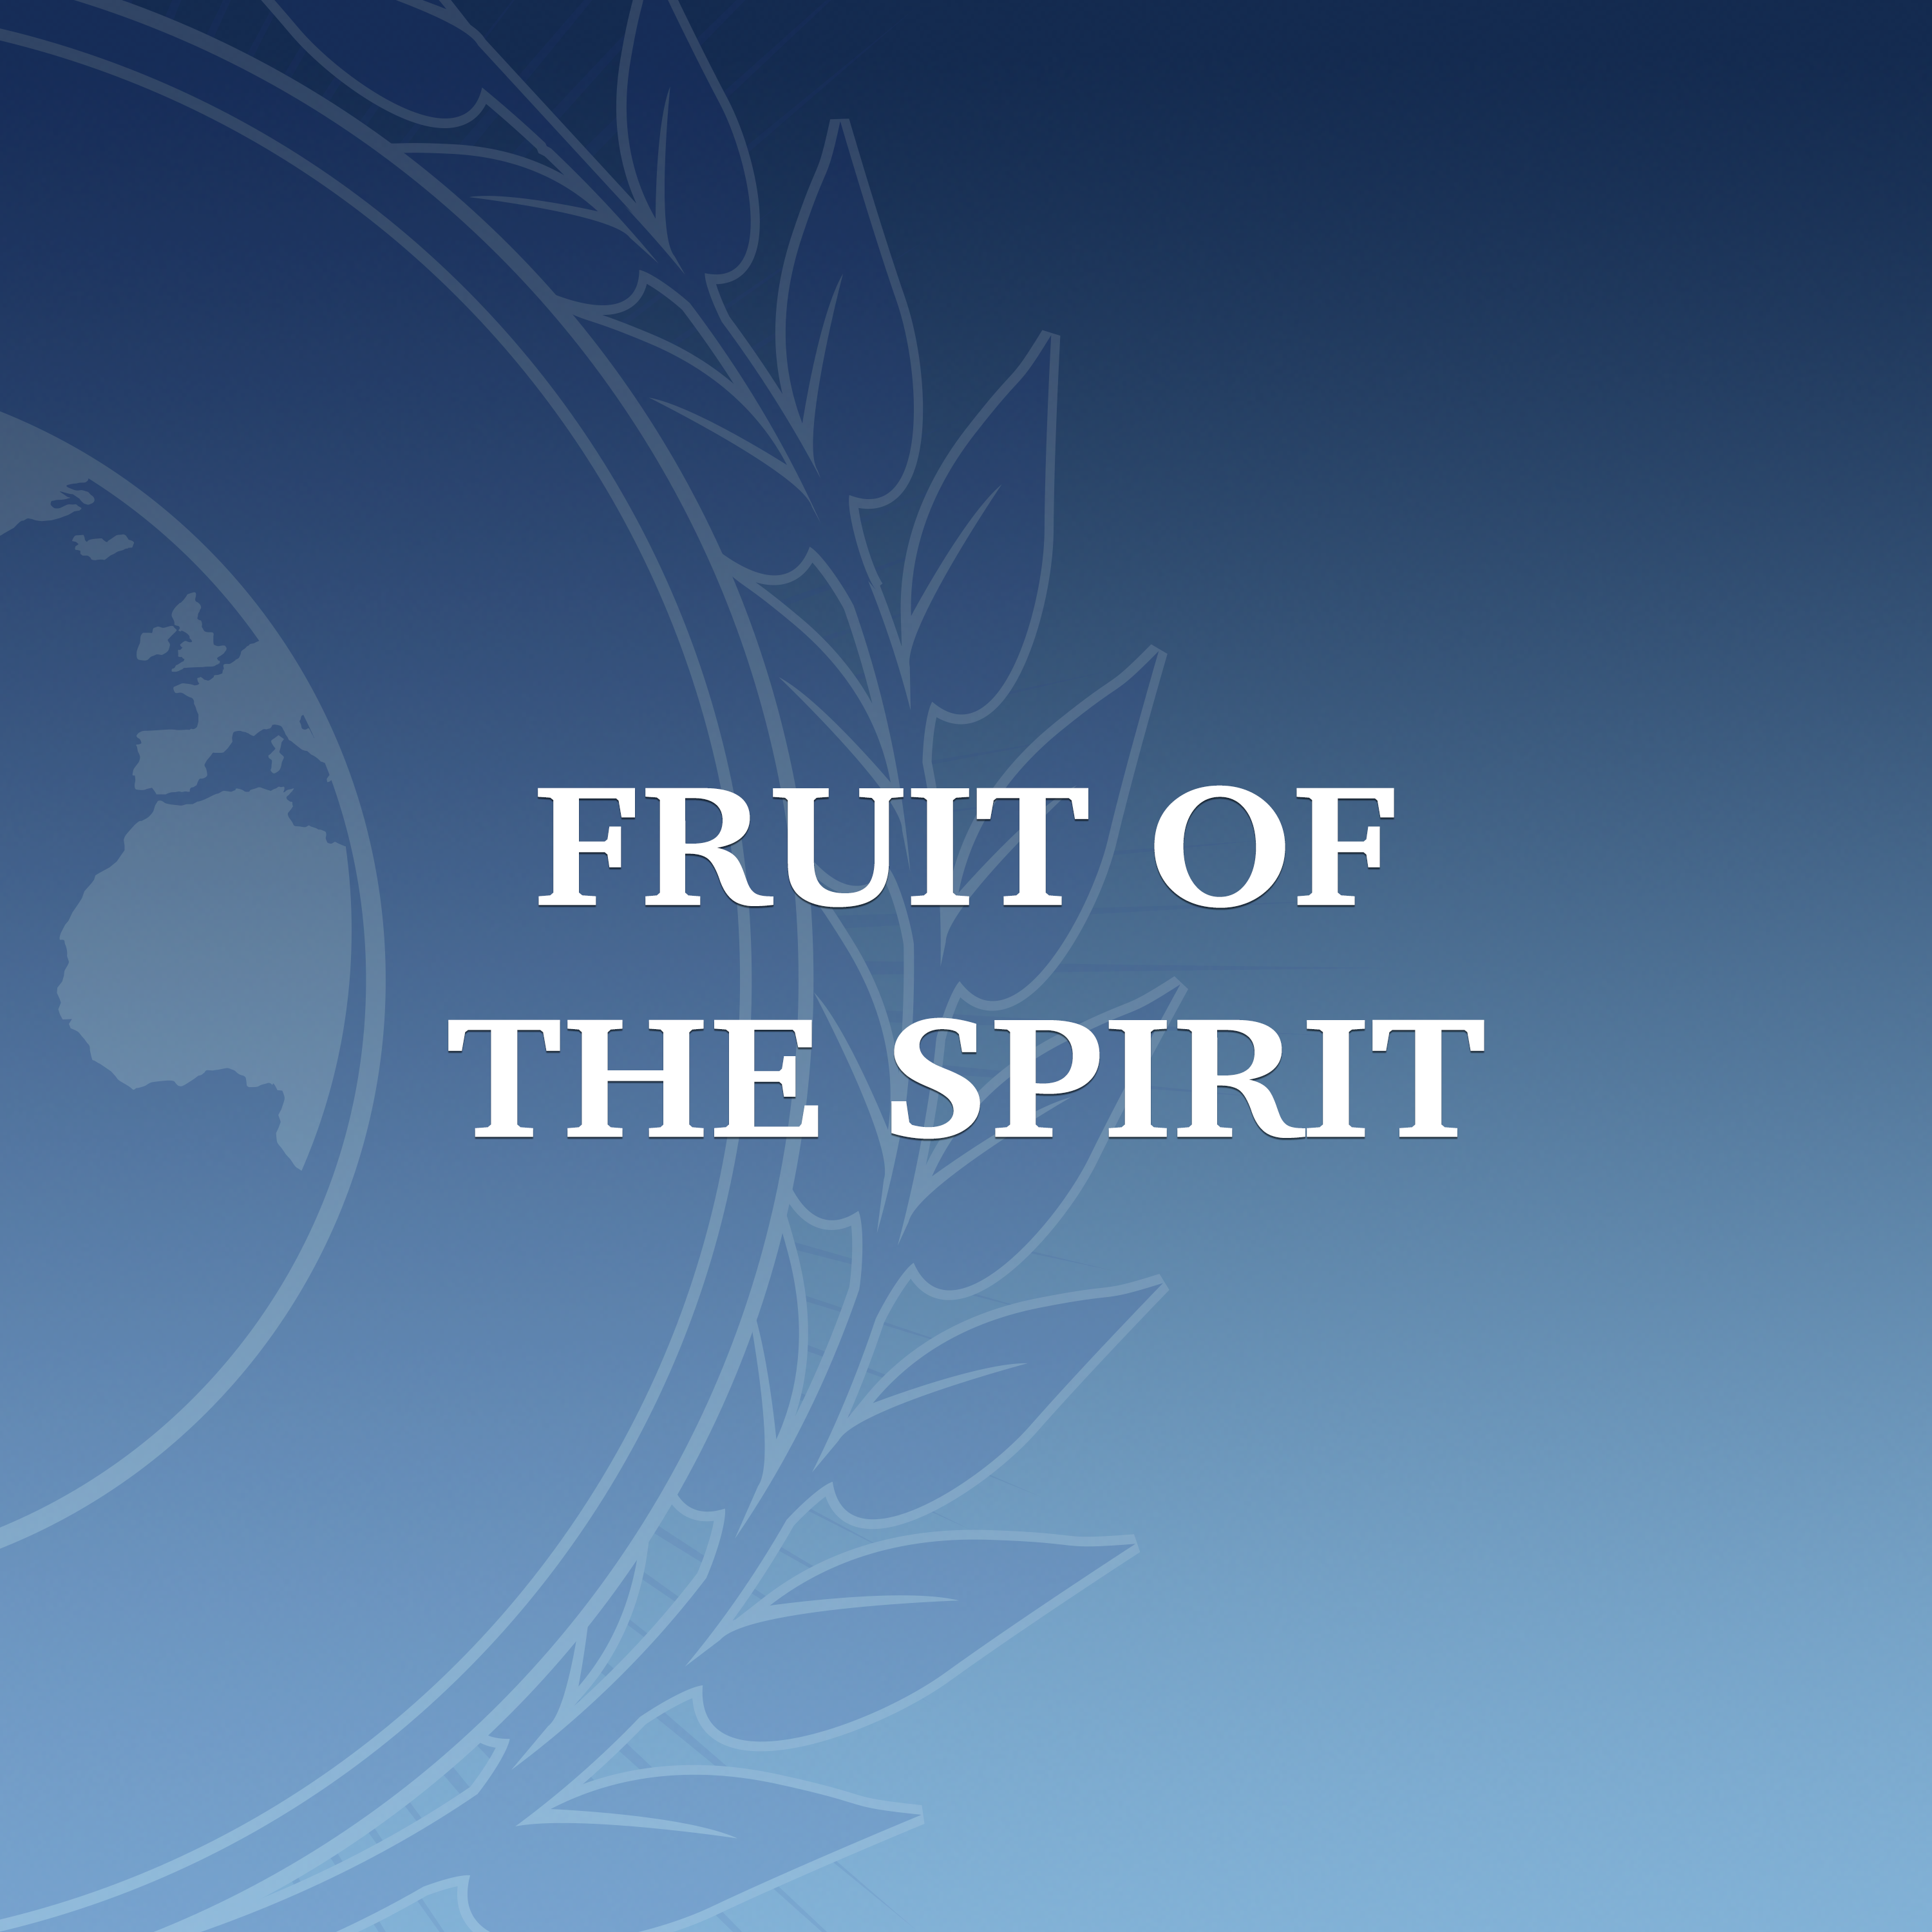 Featured image for “Fruit of the Spirit”